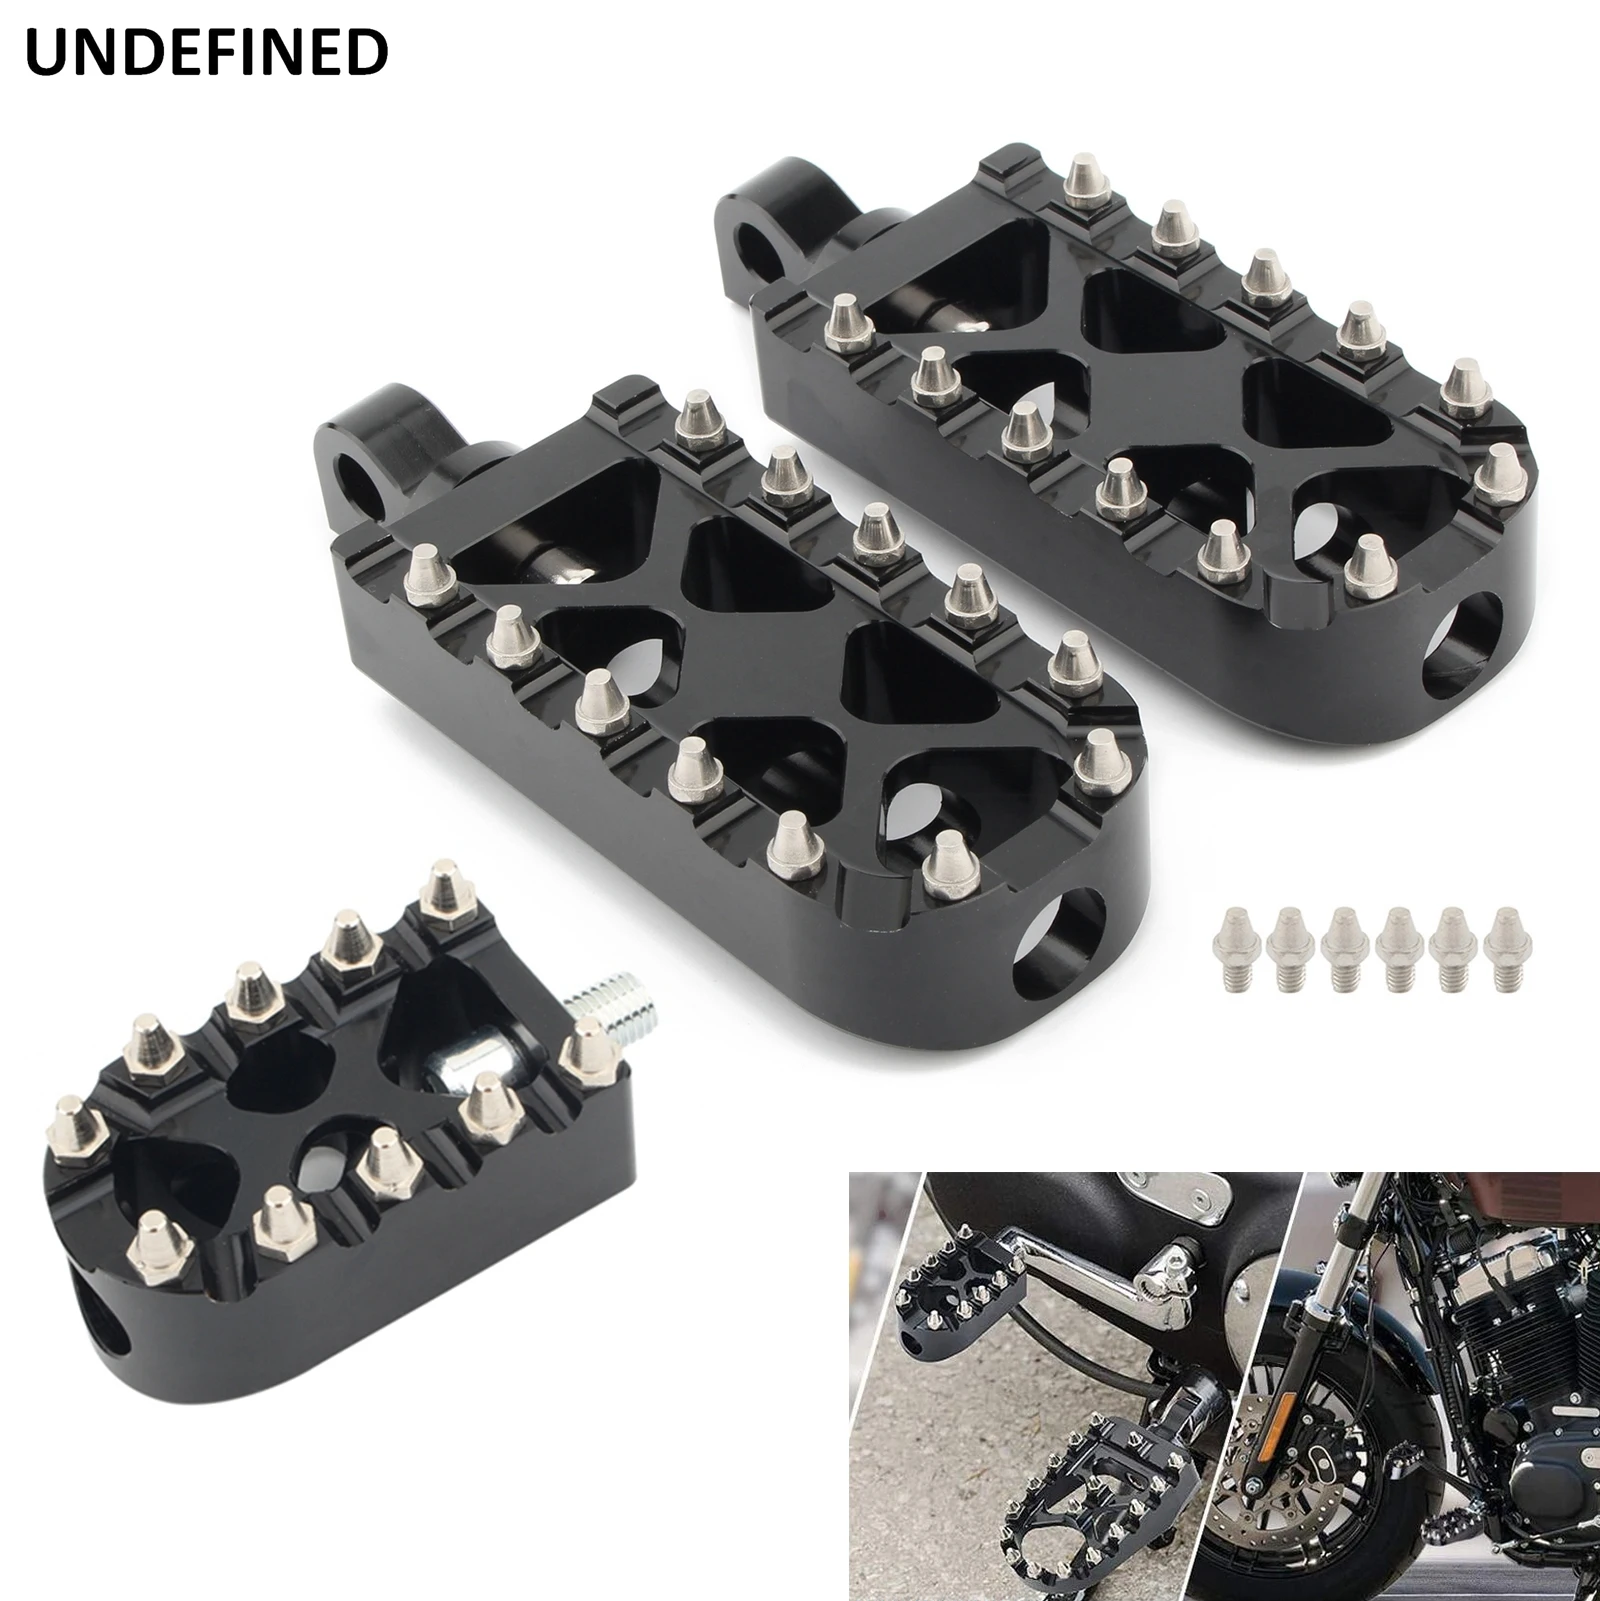 MX Foot Pegs Footrest Gear Shift Brake Pedals Toe Shifter Peg For Harley - $24.79+